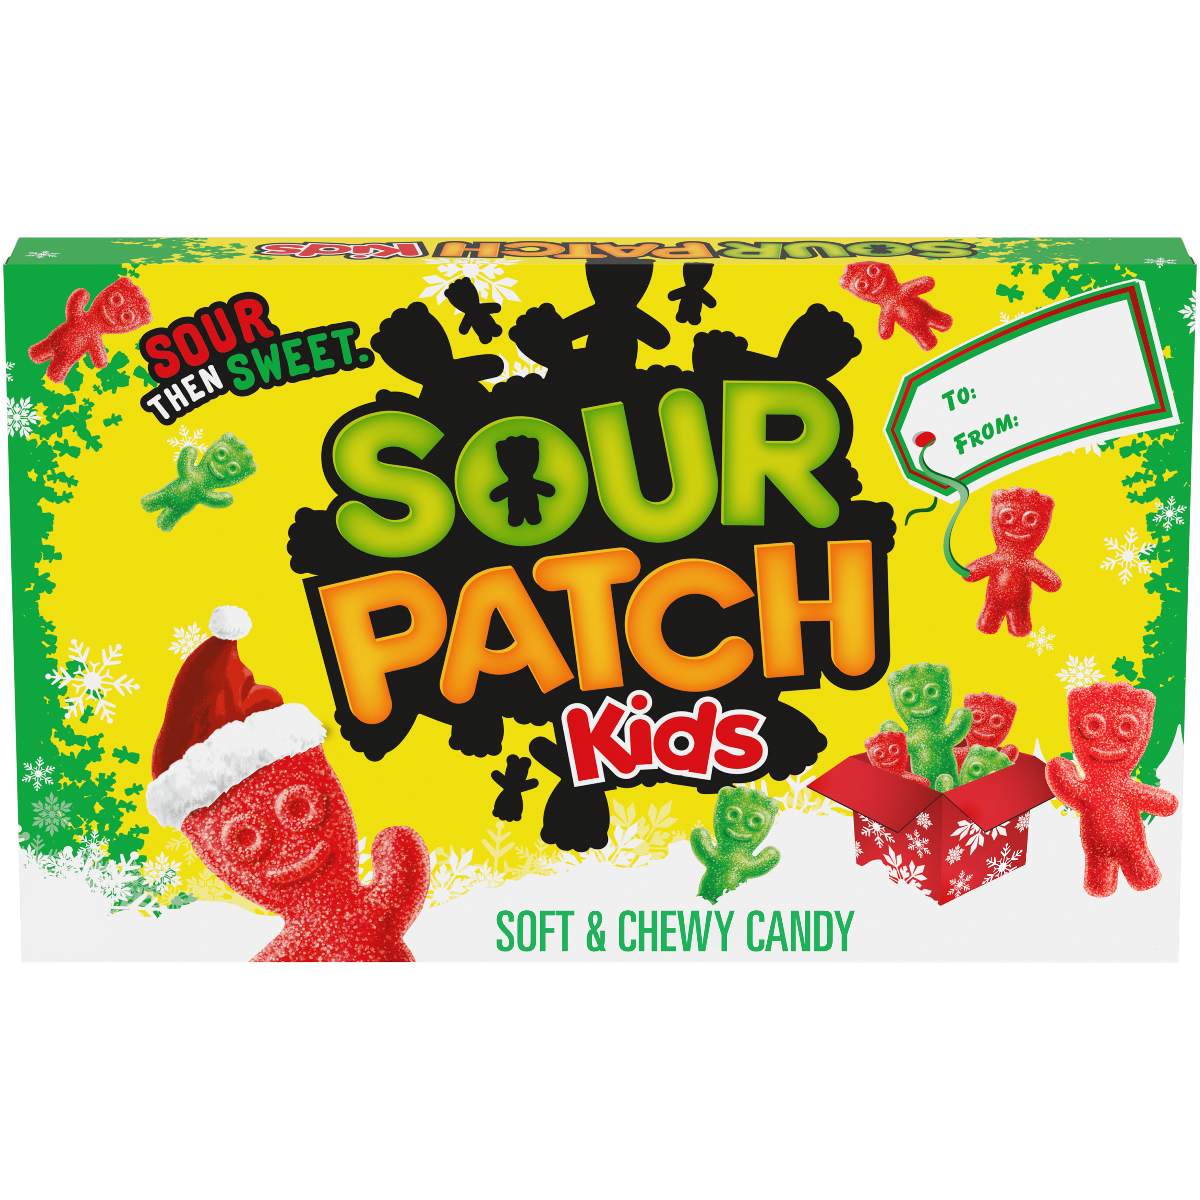 Sour Patch Kids Christmas (3.1oz Theater Box) - Premier Trading Cards